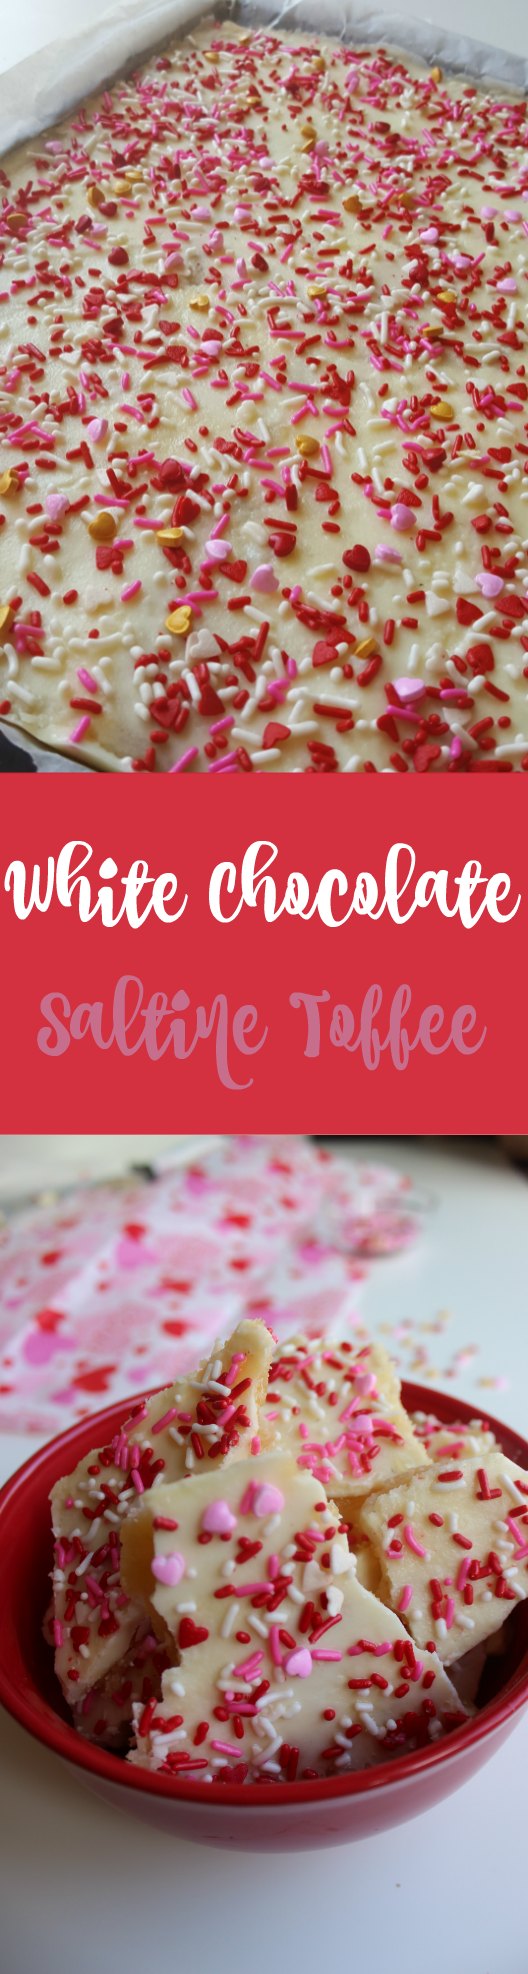 White Chocolate Saltine Toffee - Easy to make salted white chocolate saltine toffee bark a decadent treat or gift for Valentine's.